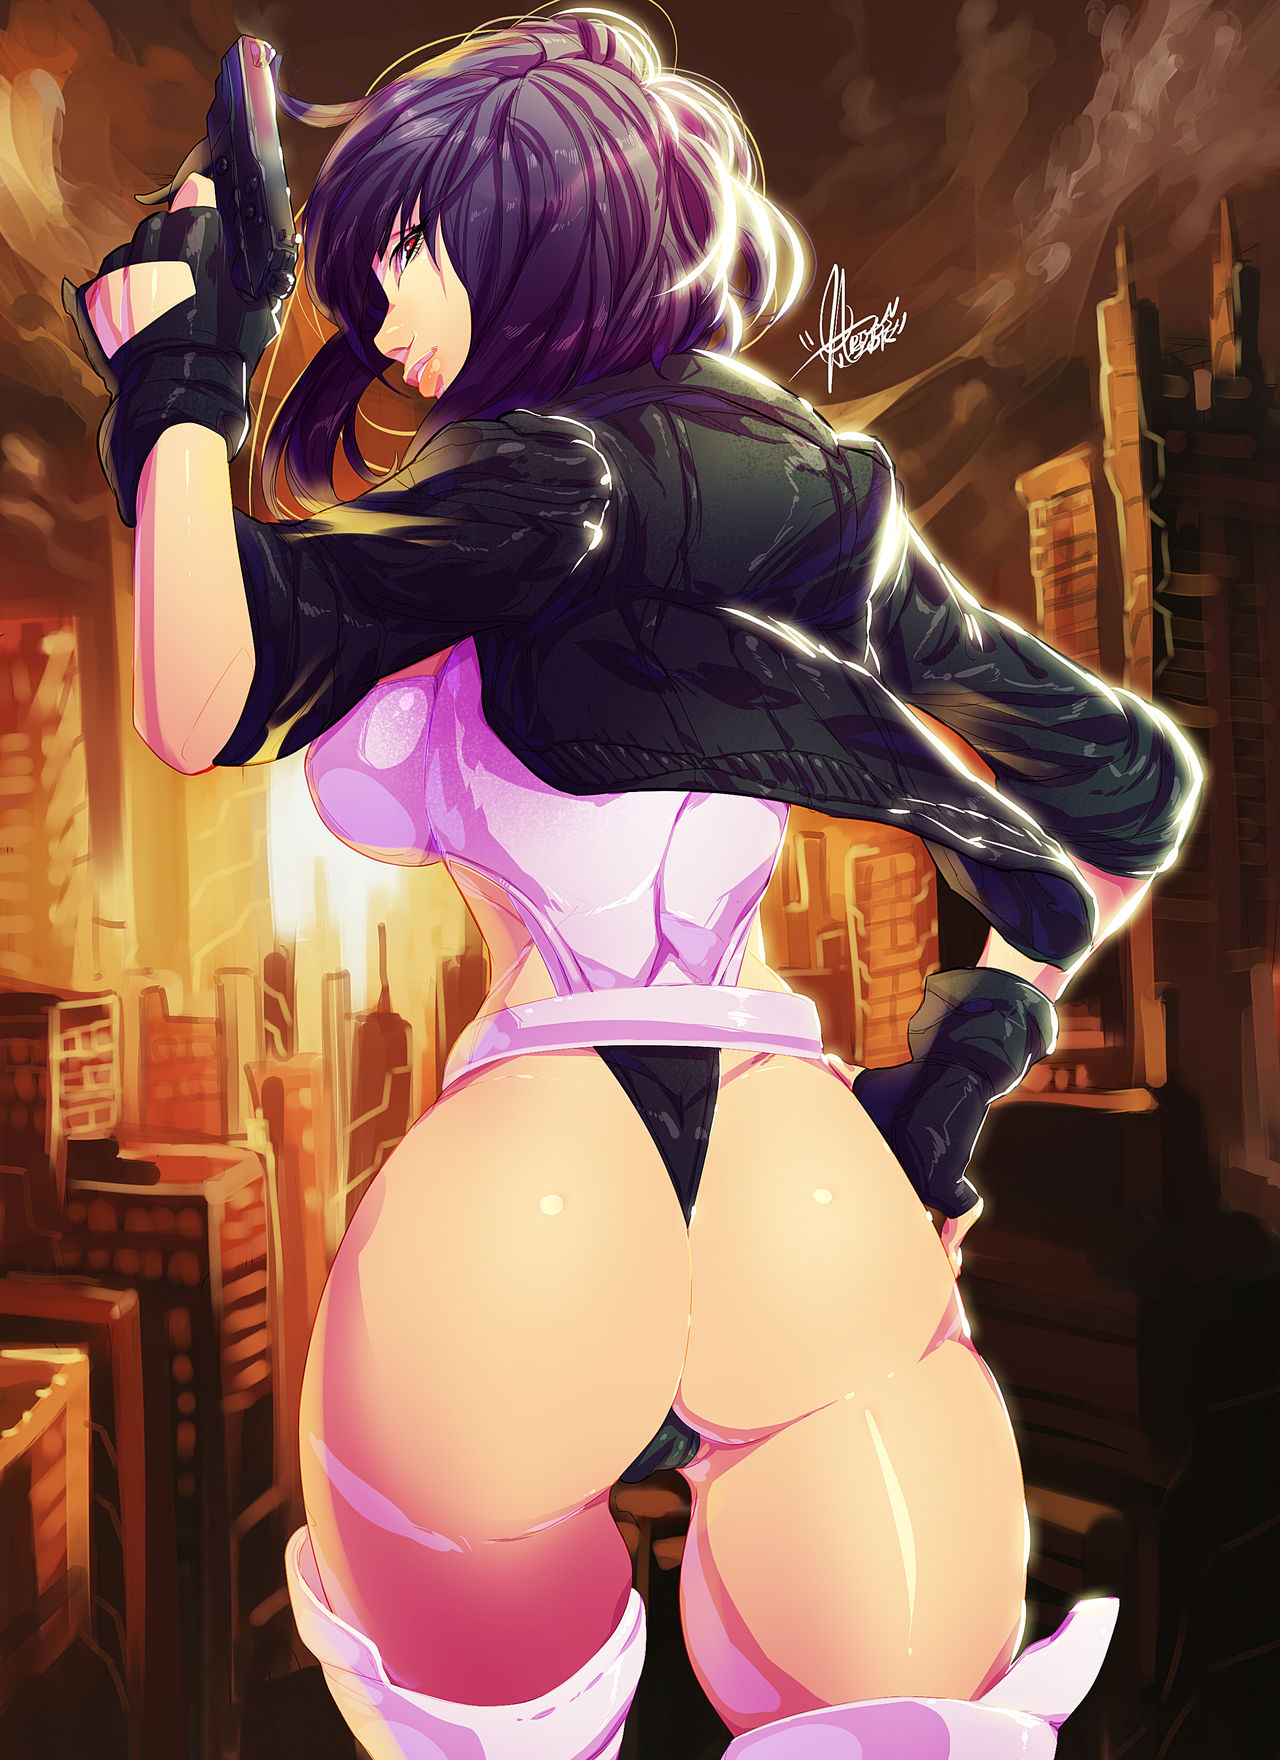 Girls in Cropped Jackets - 107/160 - Hentai Image.